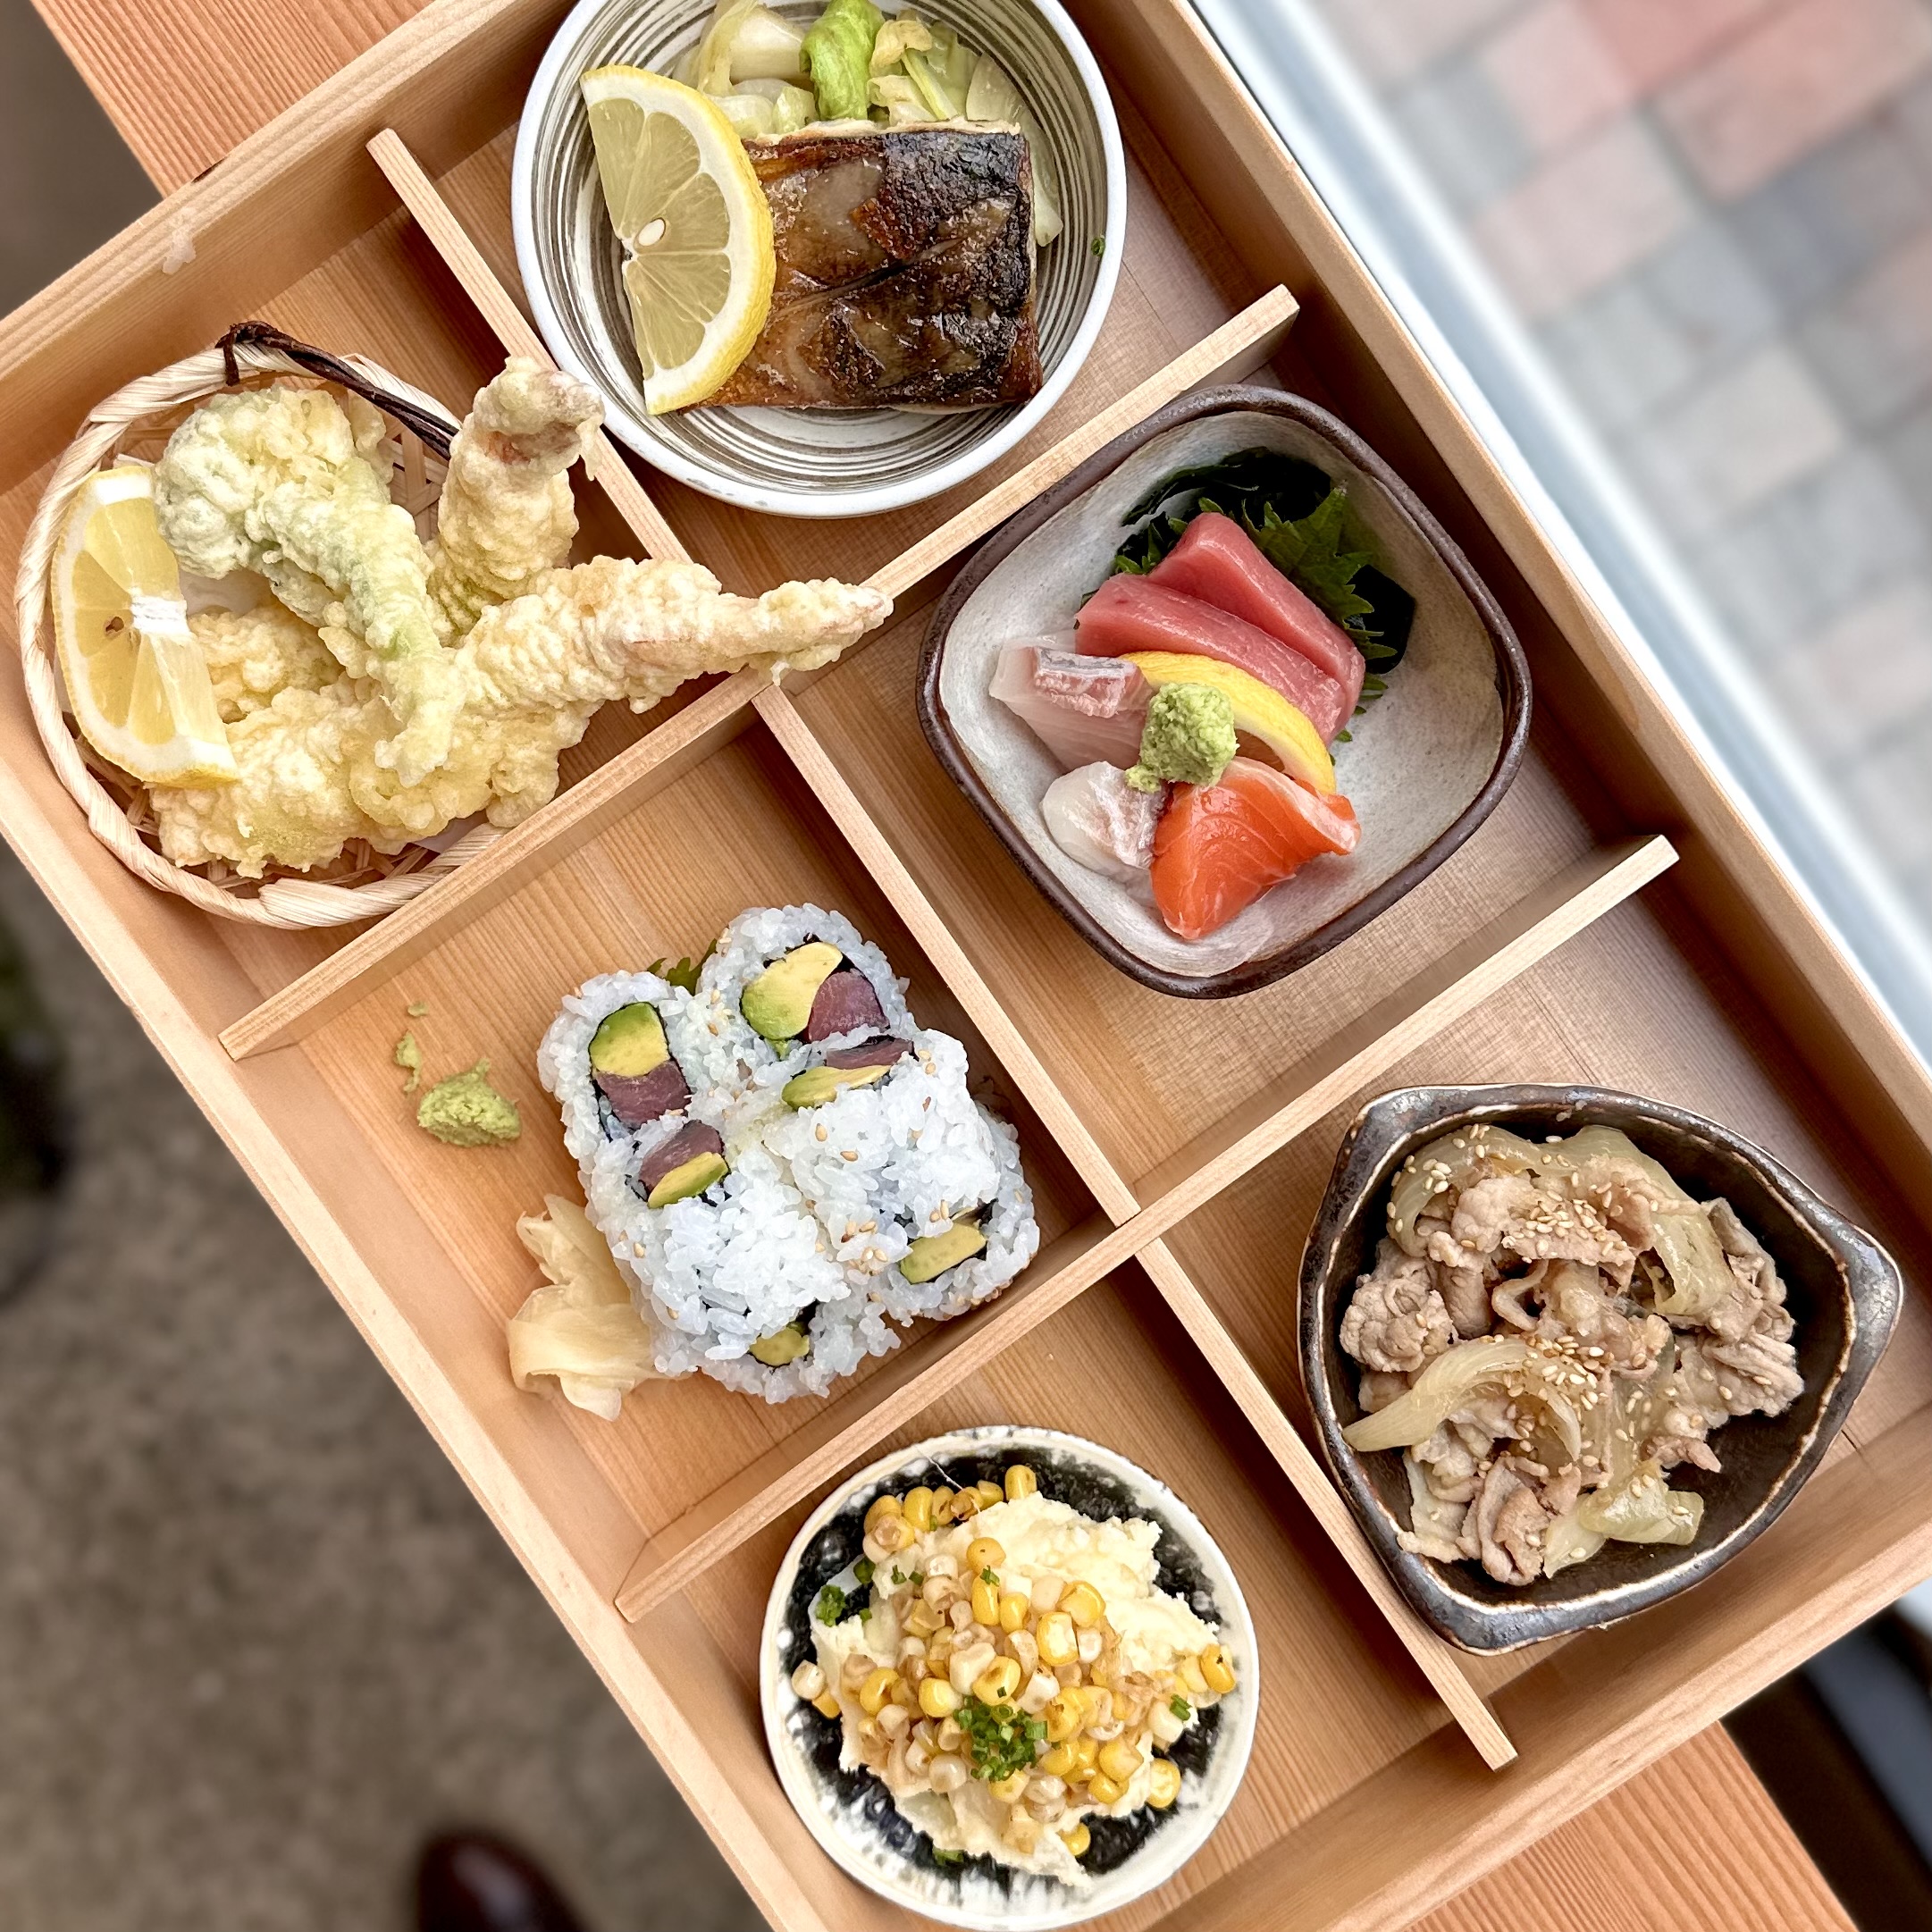 Miyake is now open for lunch